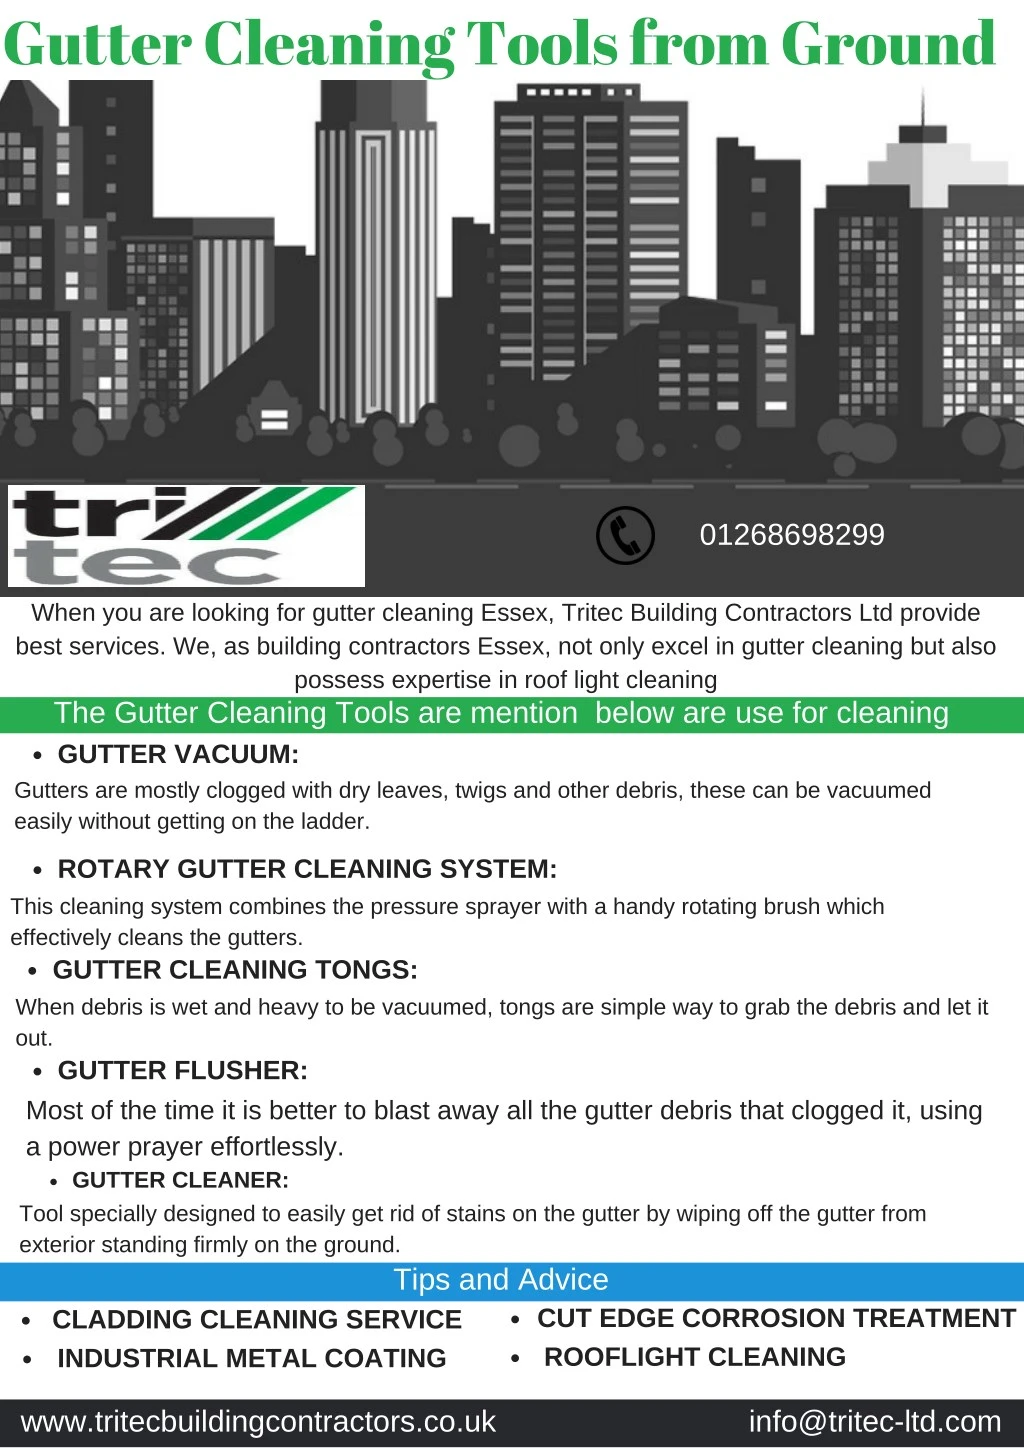 gutter cleaning tools from ground